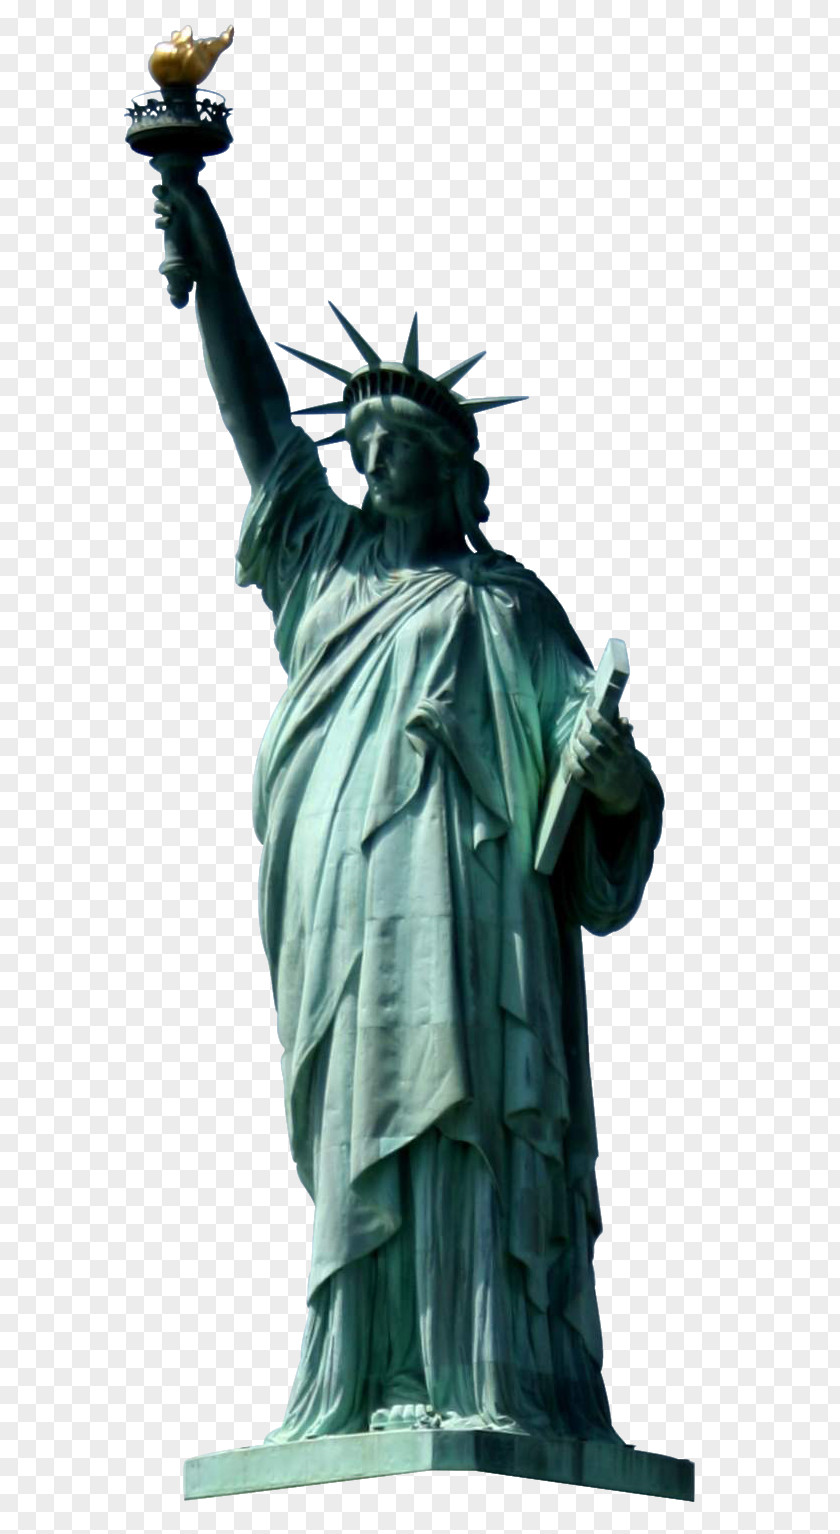 New York Statue Of Liberty Staten Island Ferry The Colossus PNG